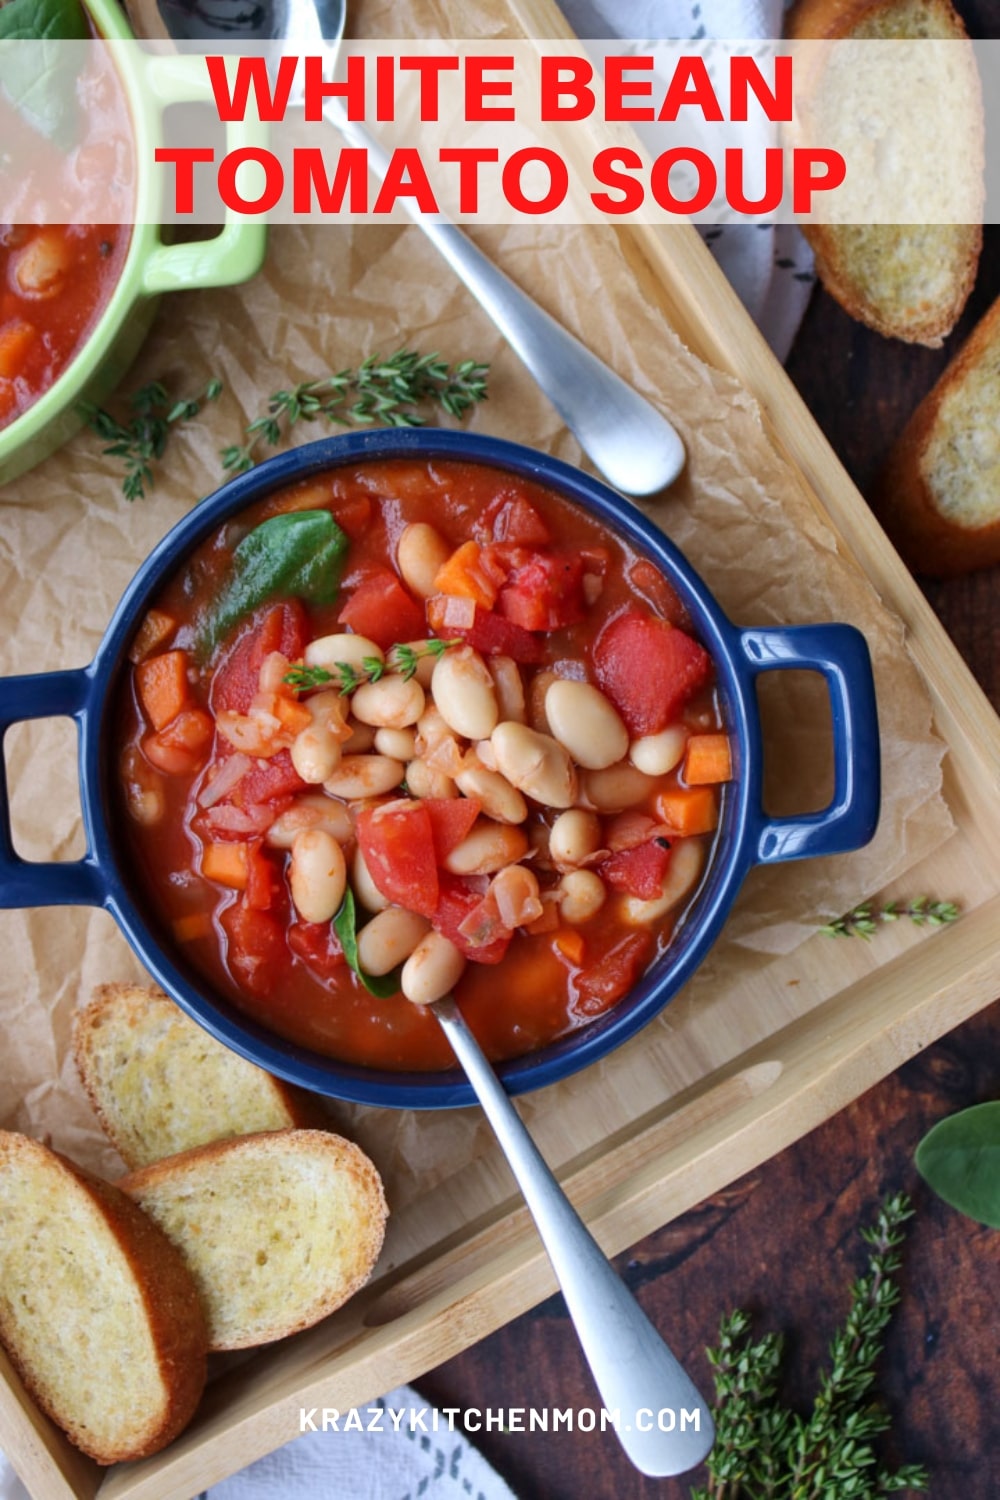 White Bean Tomato Soup is a hearty, low-calorie, low-carb, tomato-based soup. It's made with canned tomatoes, beans, carrots, spinach, herbs, and spices. via @krazykitchenmom